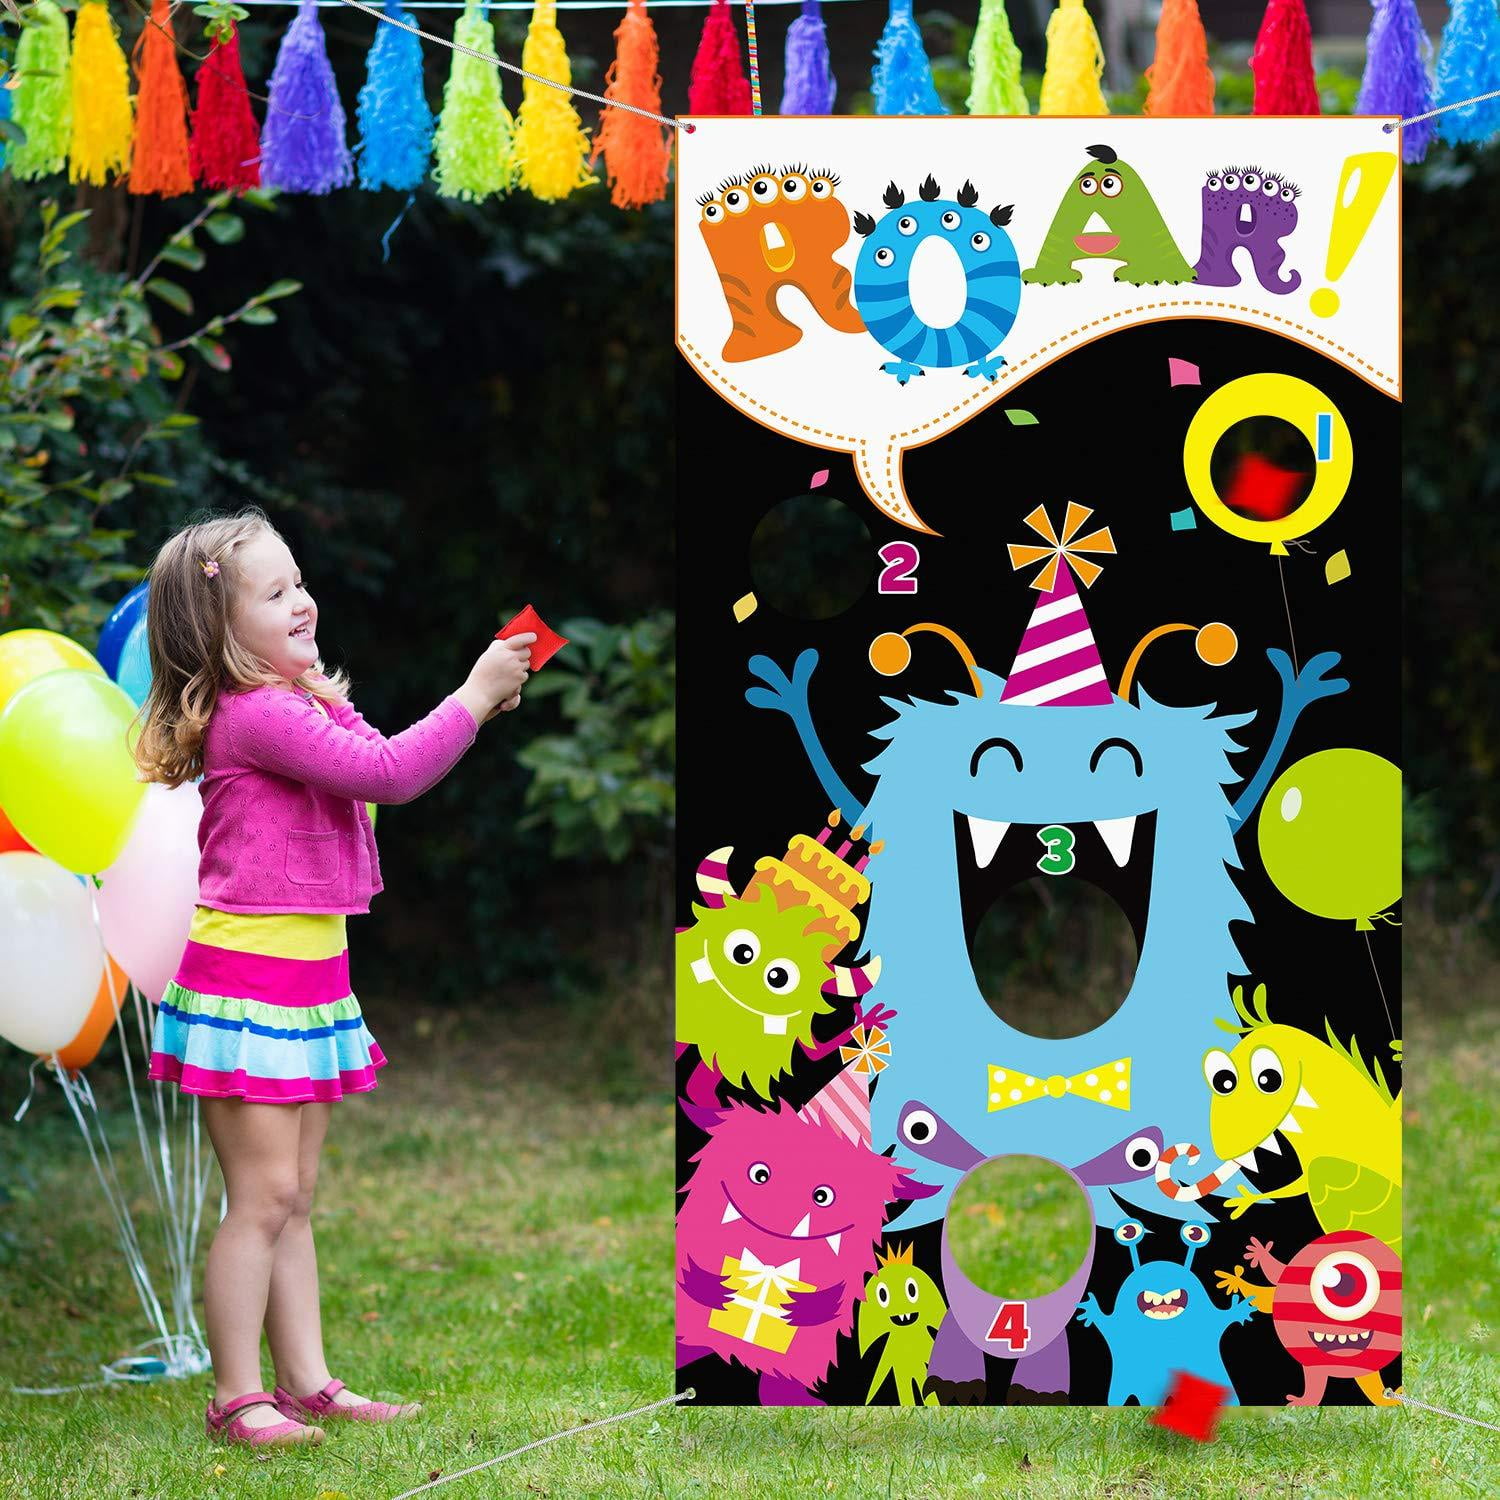 ABC Alphabet Animal Toss Games Banner with 6 Bean Bags Outdoor Yard Activity Carnival Birthday Swimming Pool Party for Kids Adults Family